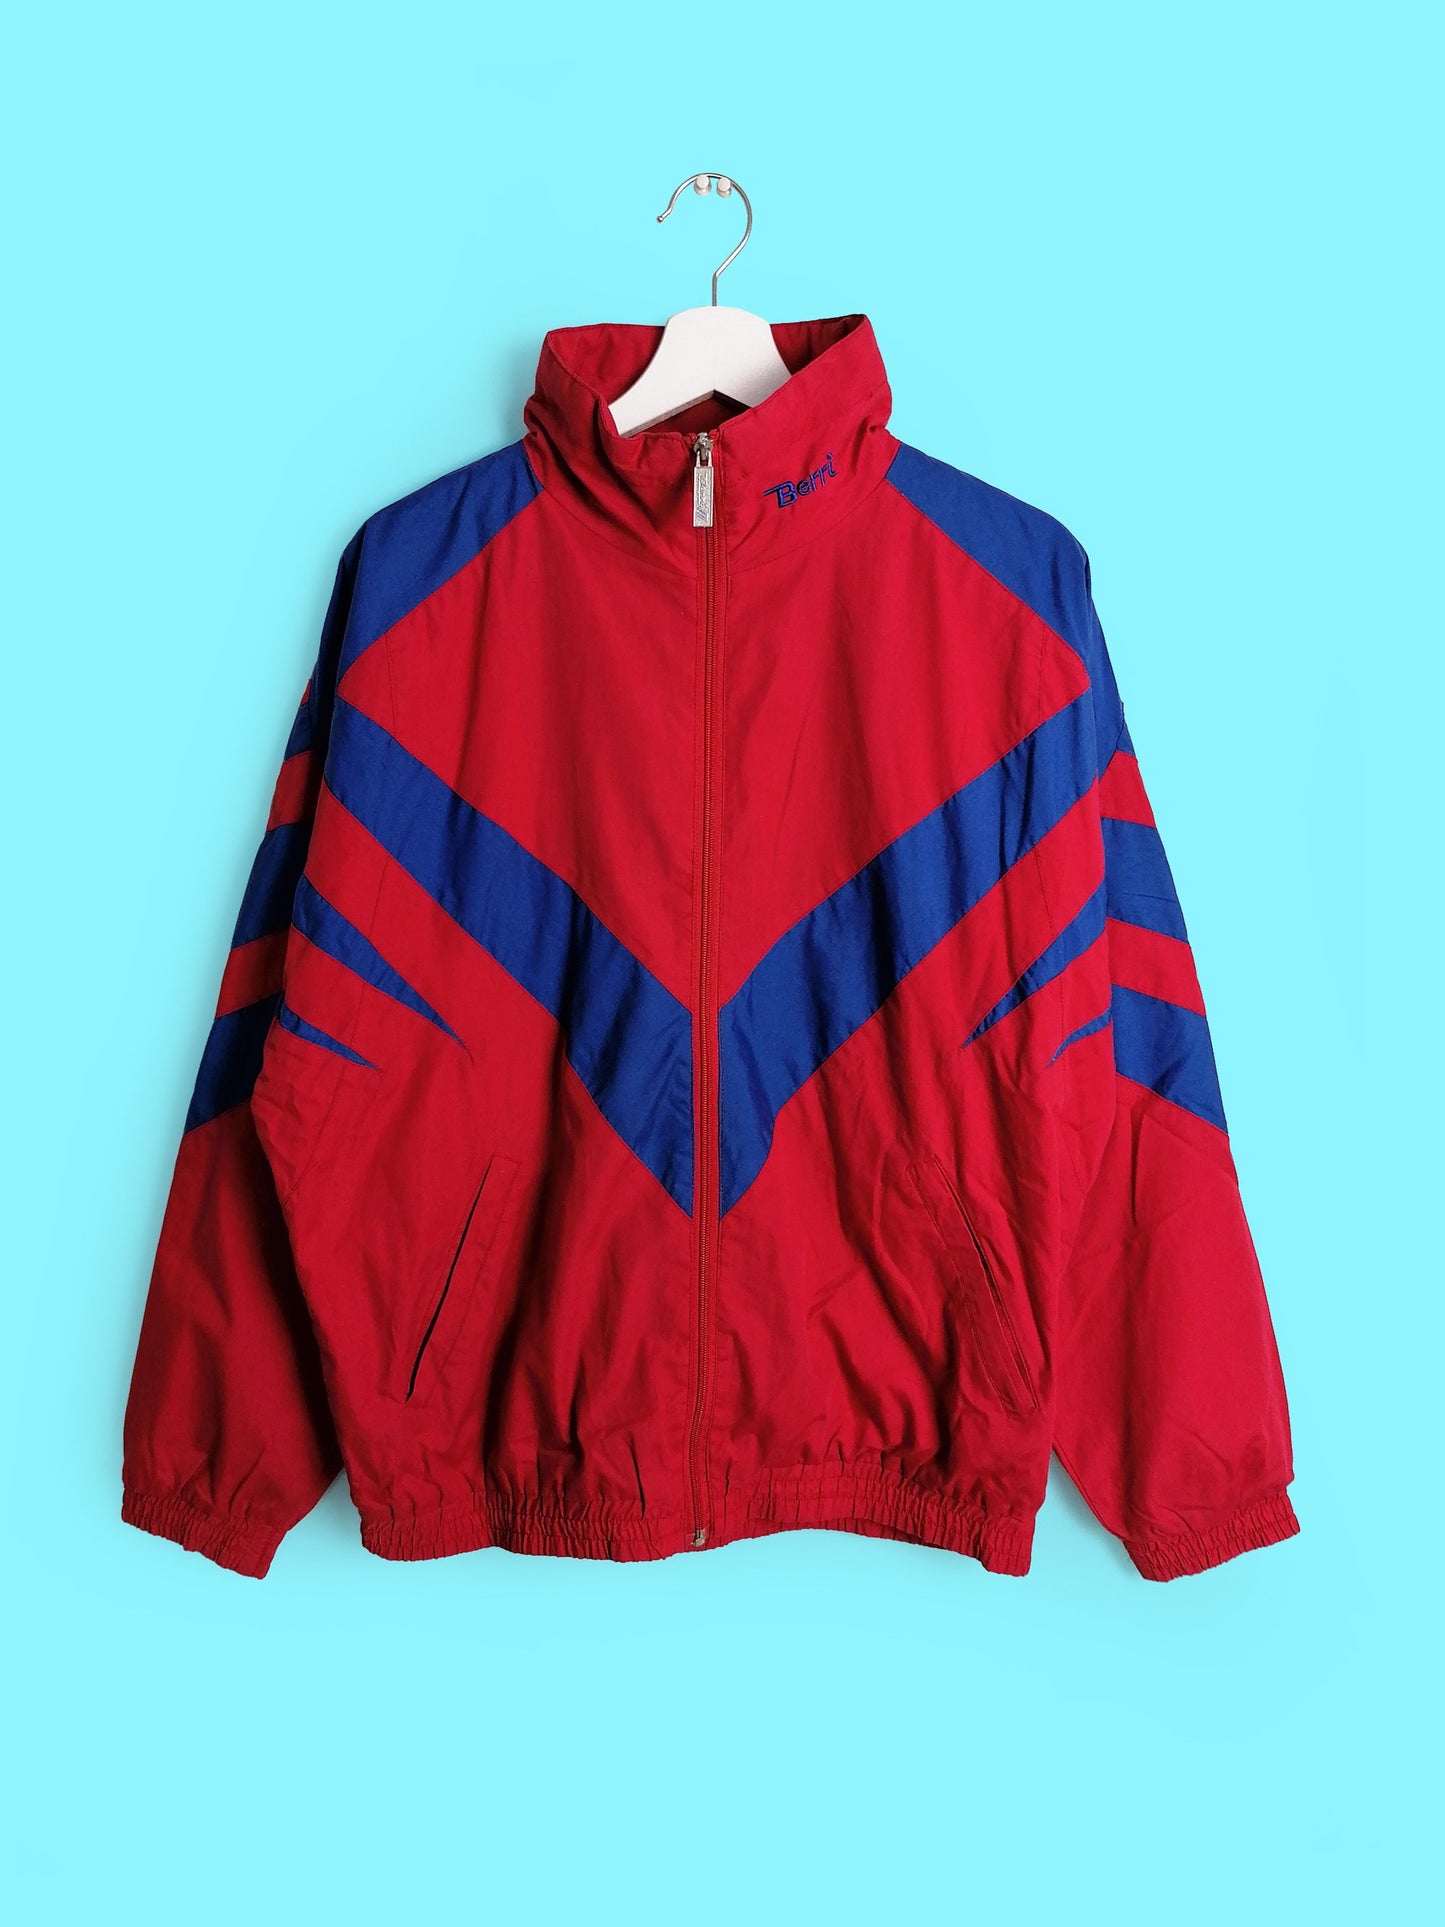 BERRI 90's Unisex Track Jacket Red and Blue - size S